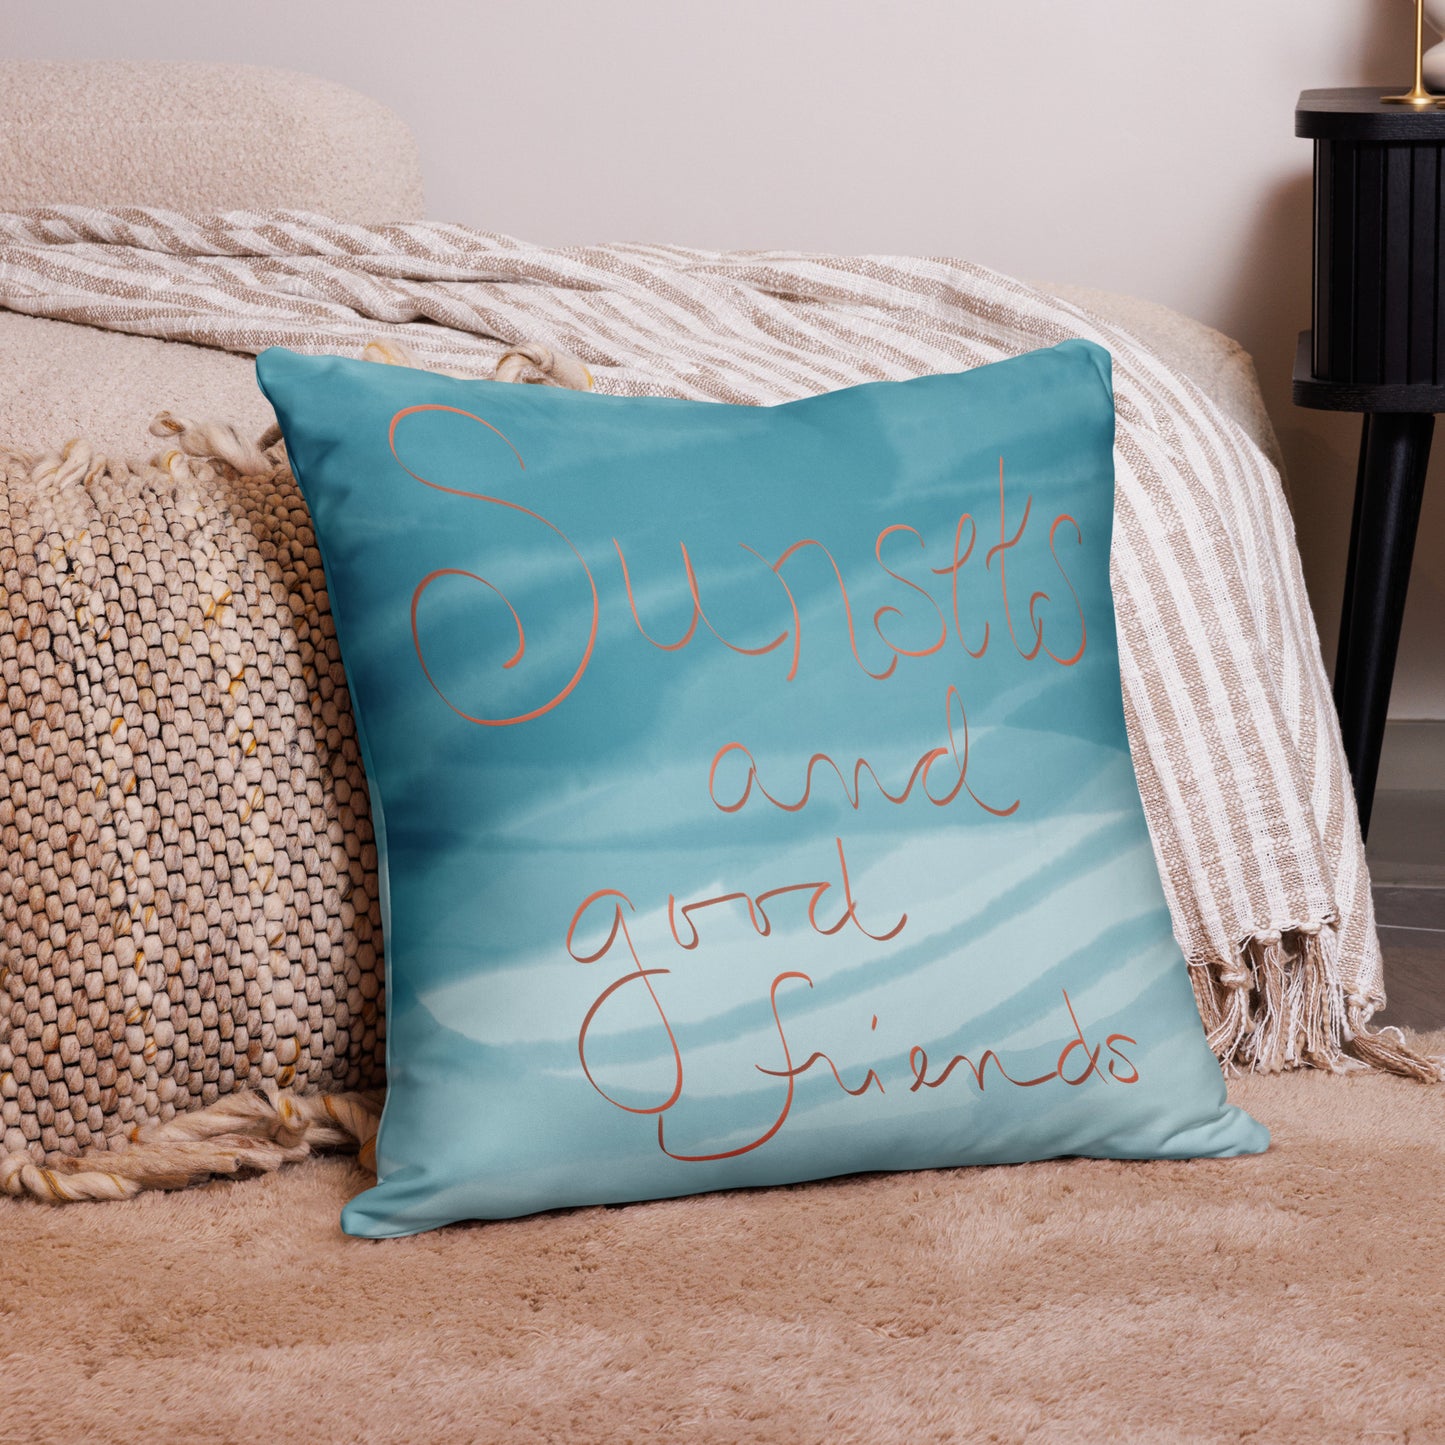 "Sunsets and Good Friends" Basic Pillow